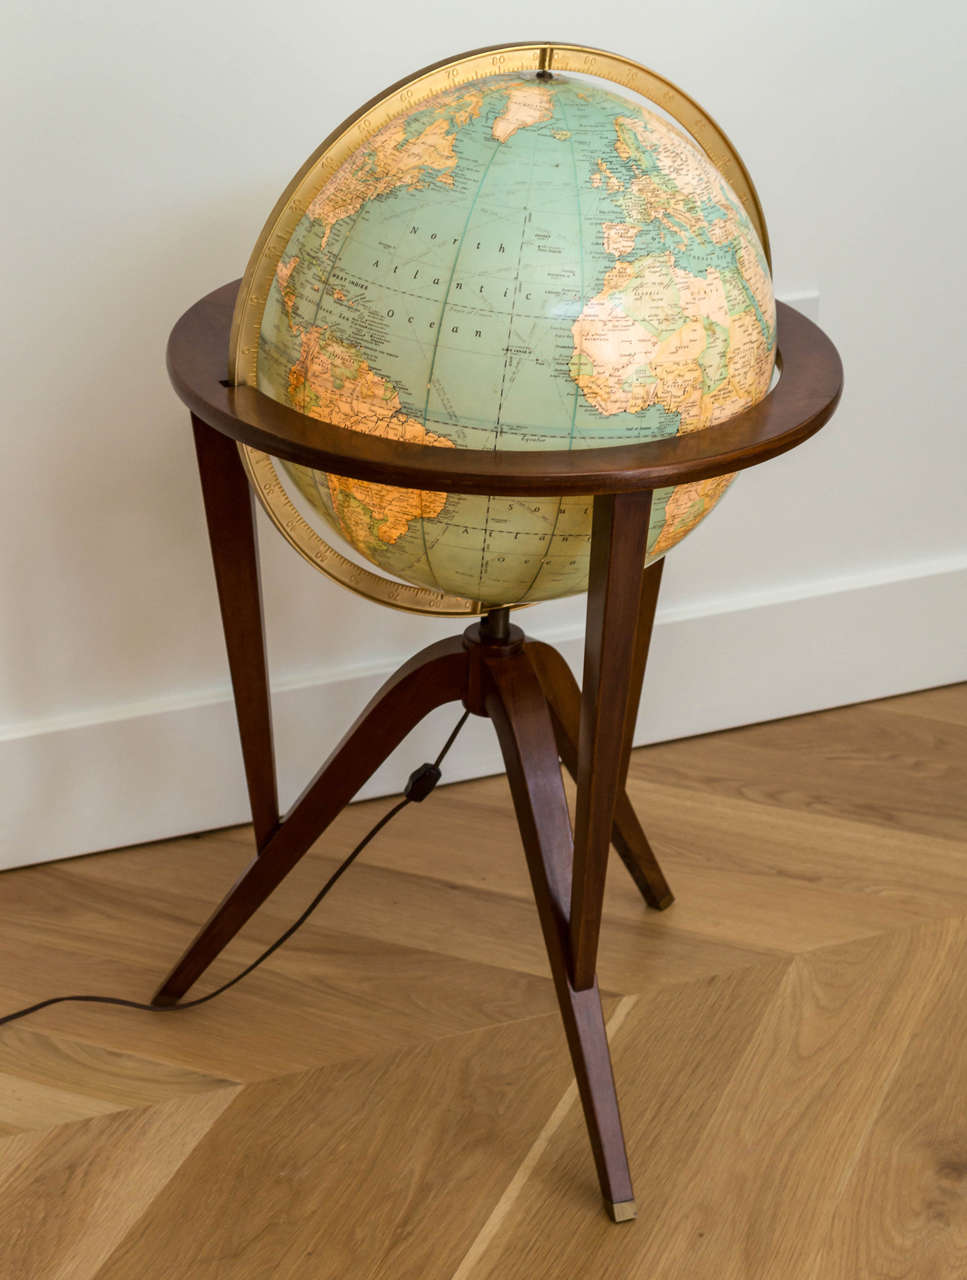 Rand McNally terrestrial globe with stand designed by Edward Wormley for Dunbar.